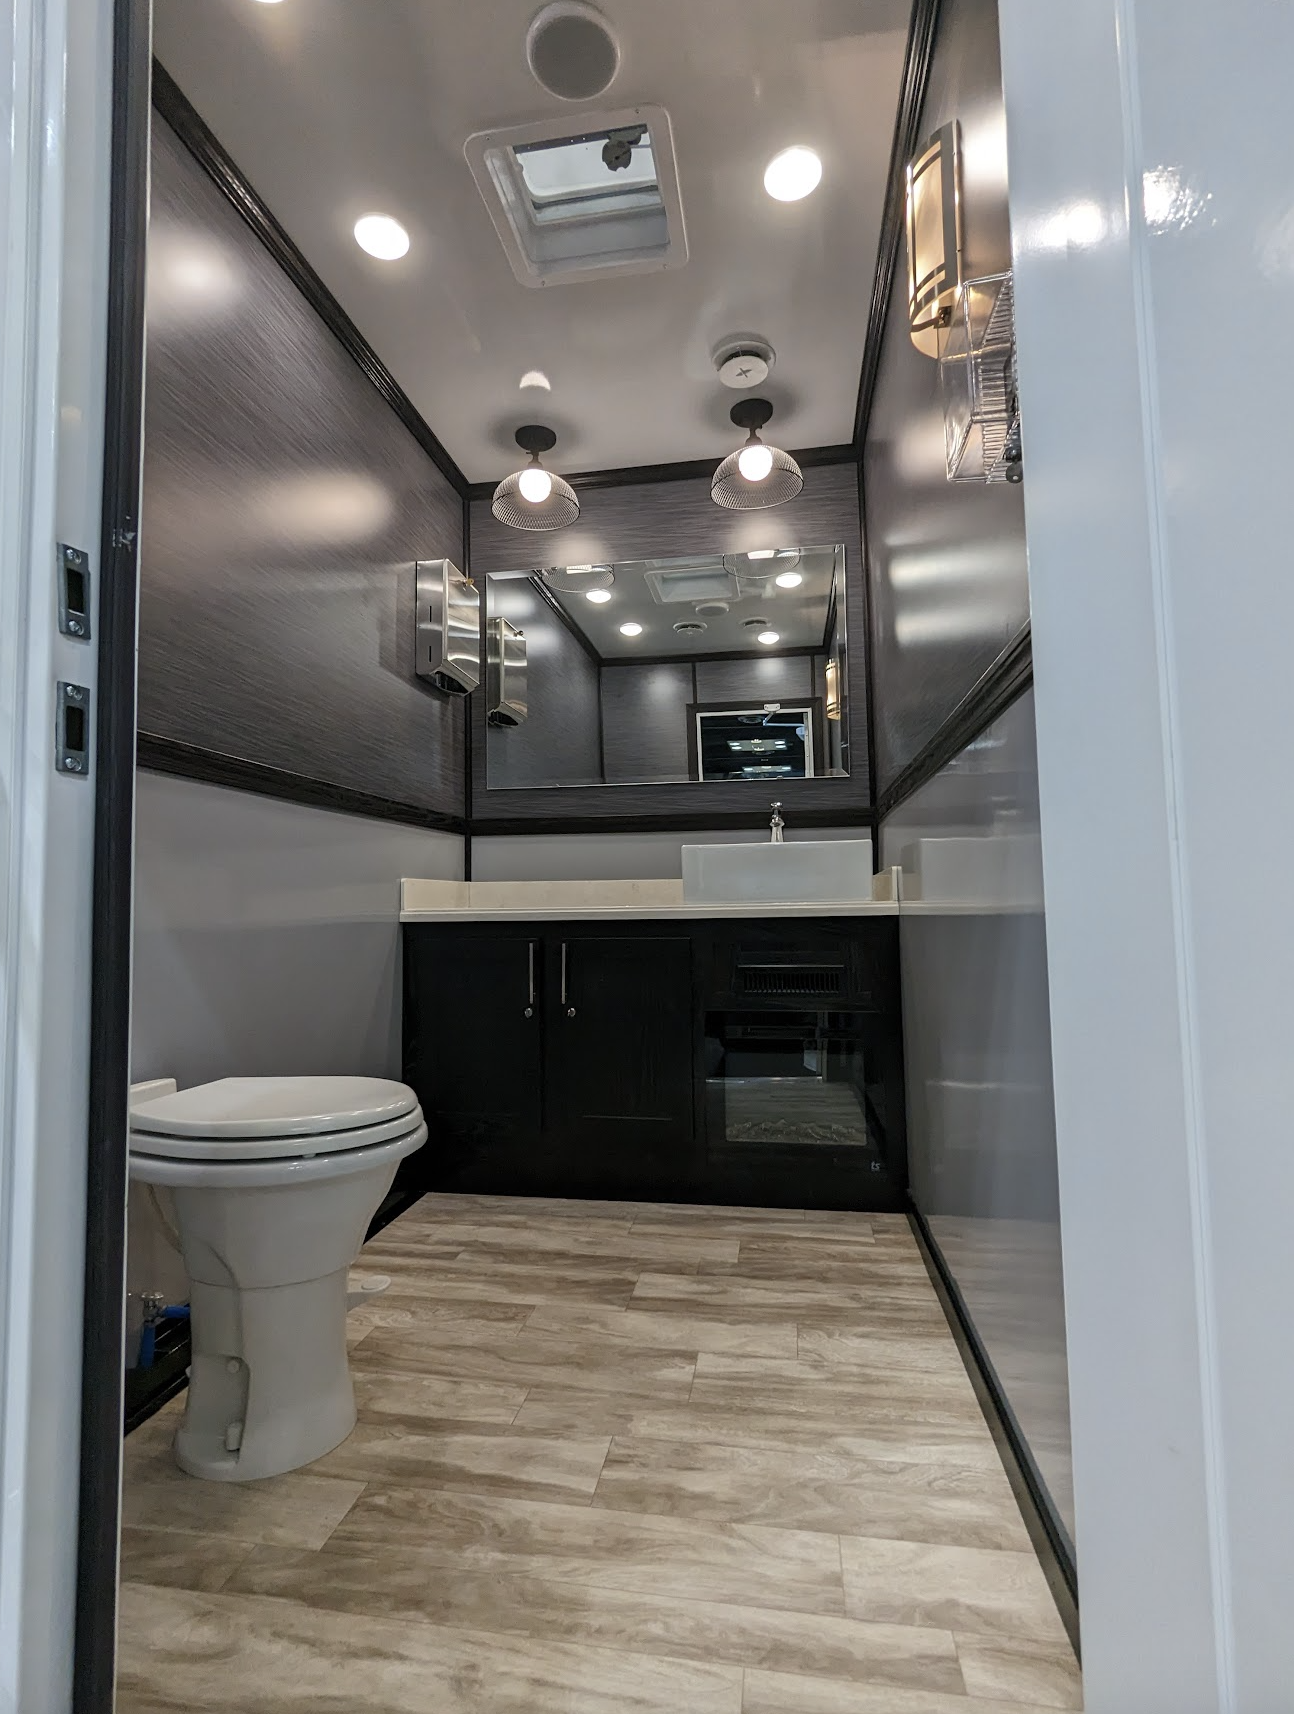 Shower and Restroom Trailer Rentals 1683038815 Screenshot 2023 05 01 at 11.17.45 AM - Renting a Luxury Restroom Trailer in Kansas City: What You Need to Know